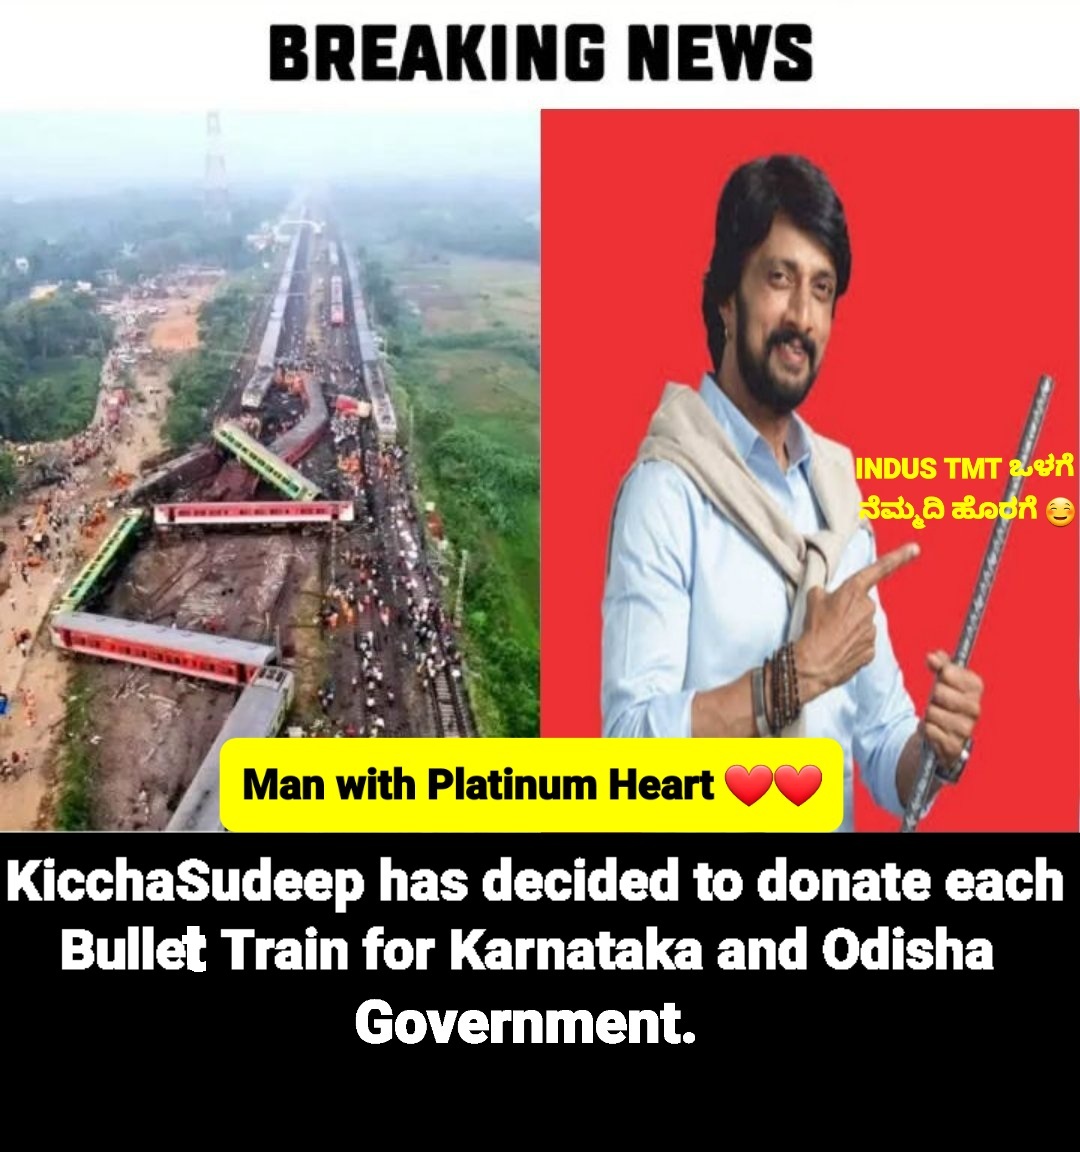 Man he is GEM OF A PERSON 🤩.

Kudos to #KicchaSudeep SIR 👏👏 for being role model for other actors.

Chlamydia and Golden heart person ❤❤ @KicchaSudeep